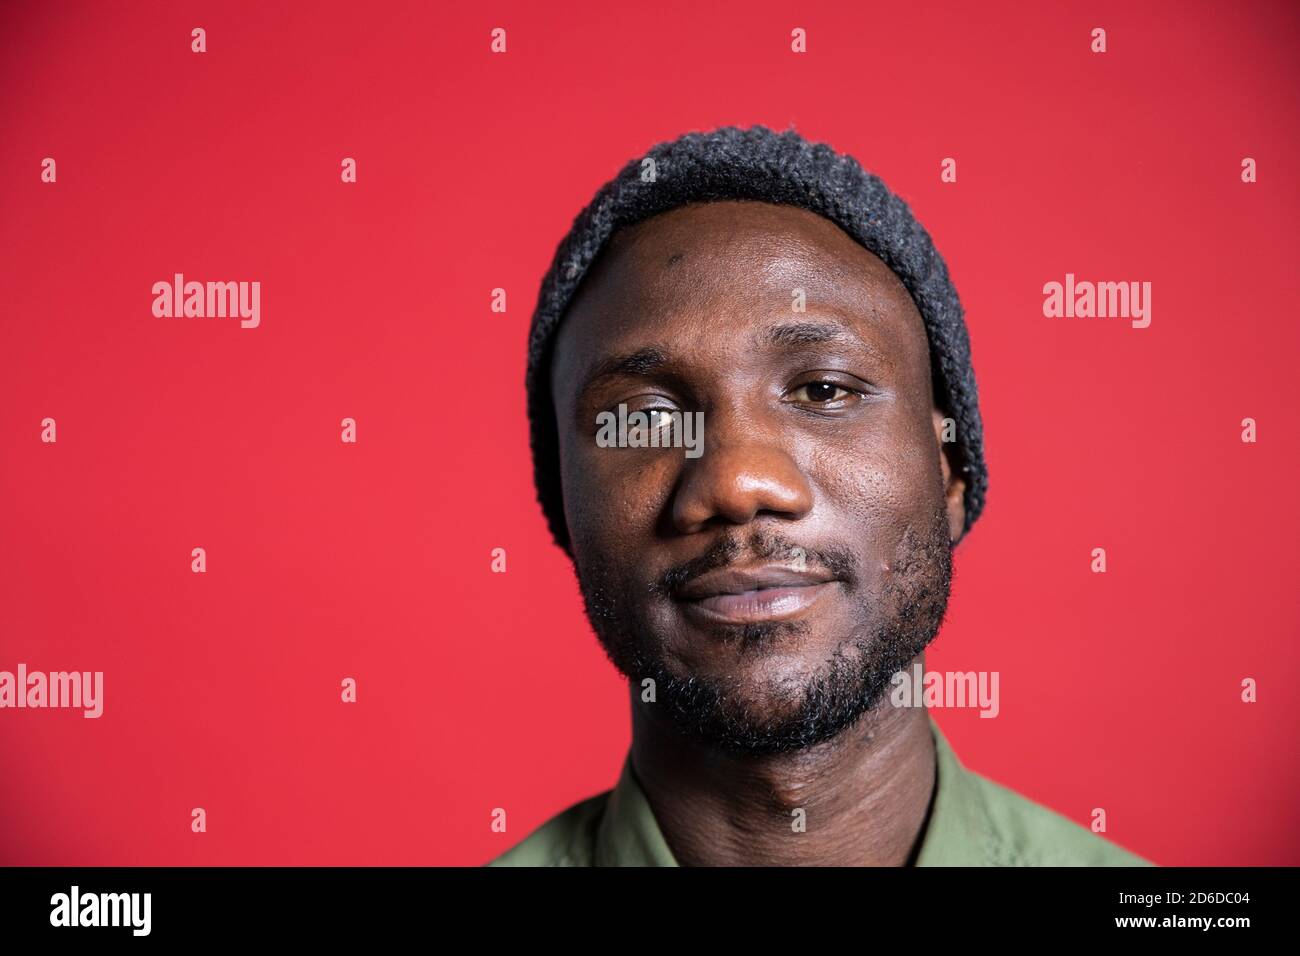 Face portrait of young black man looking at camera. Close up. Isolated background. Copy space. Stock Photo